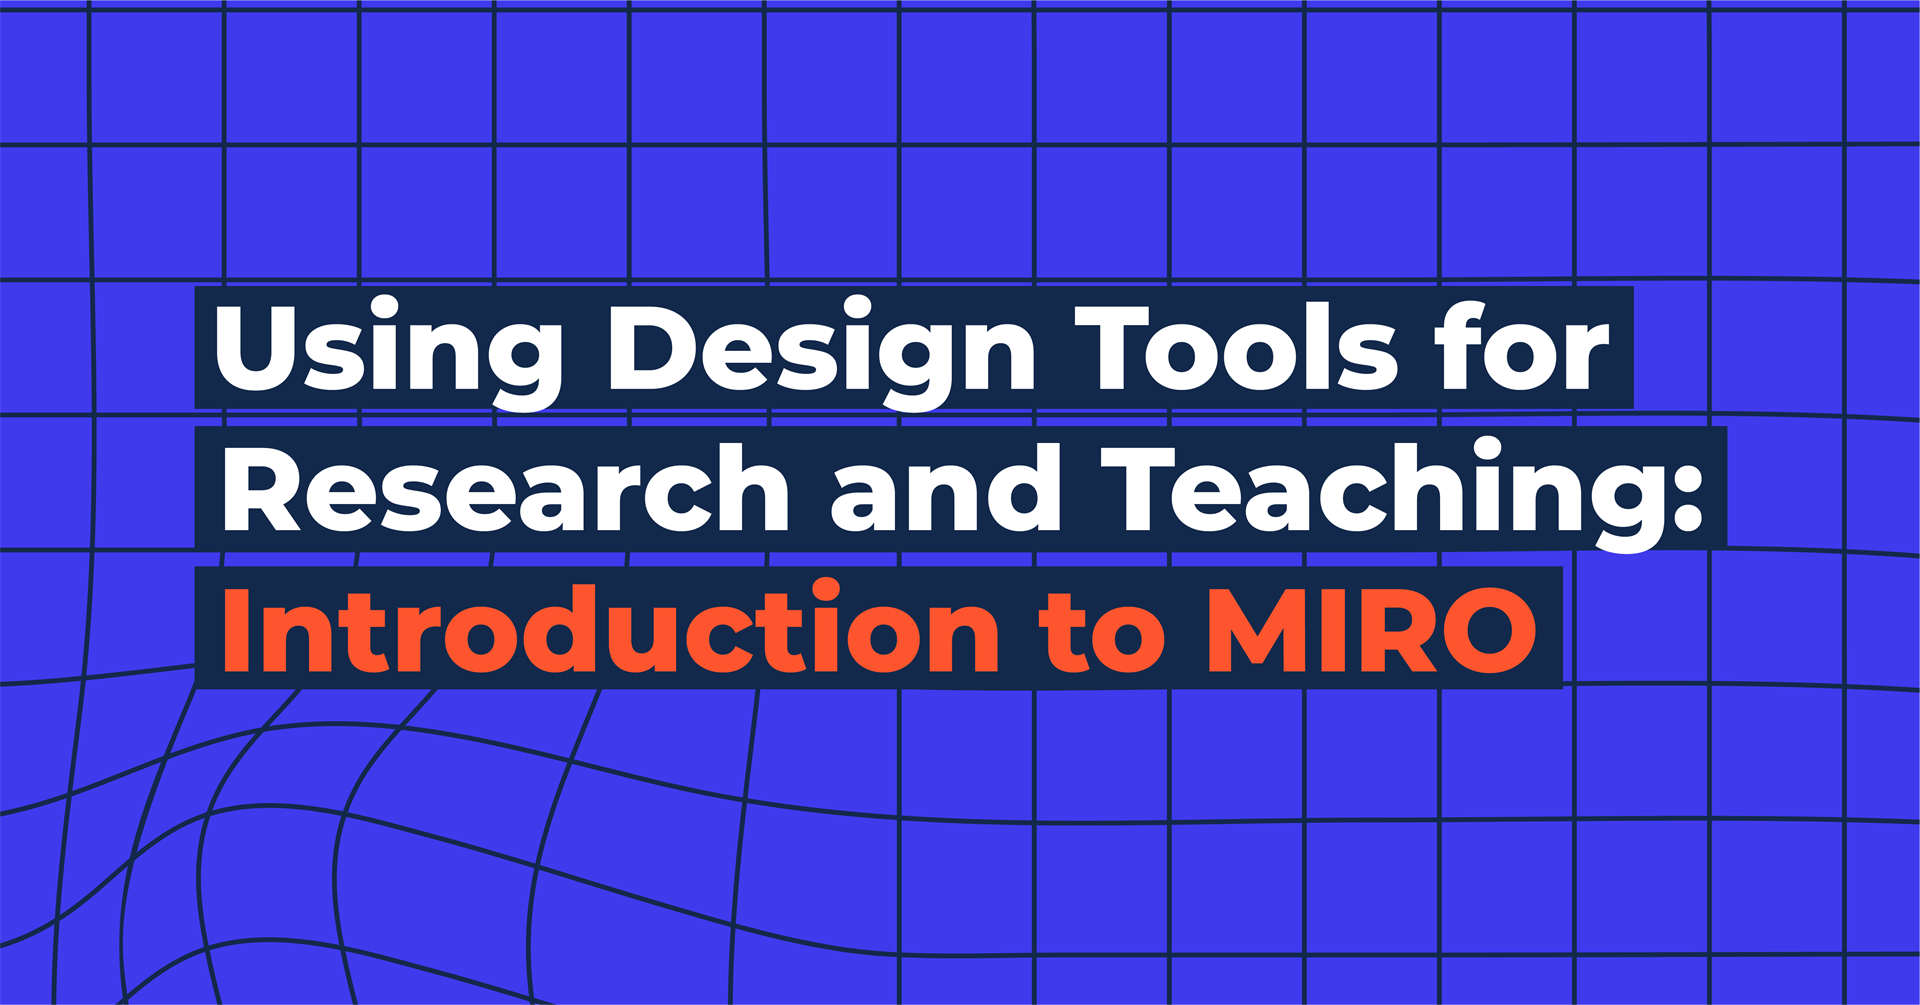 Using Design Tools for Research and Teaching: Introduction to Miro